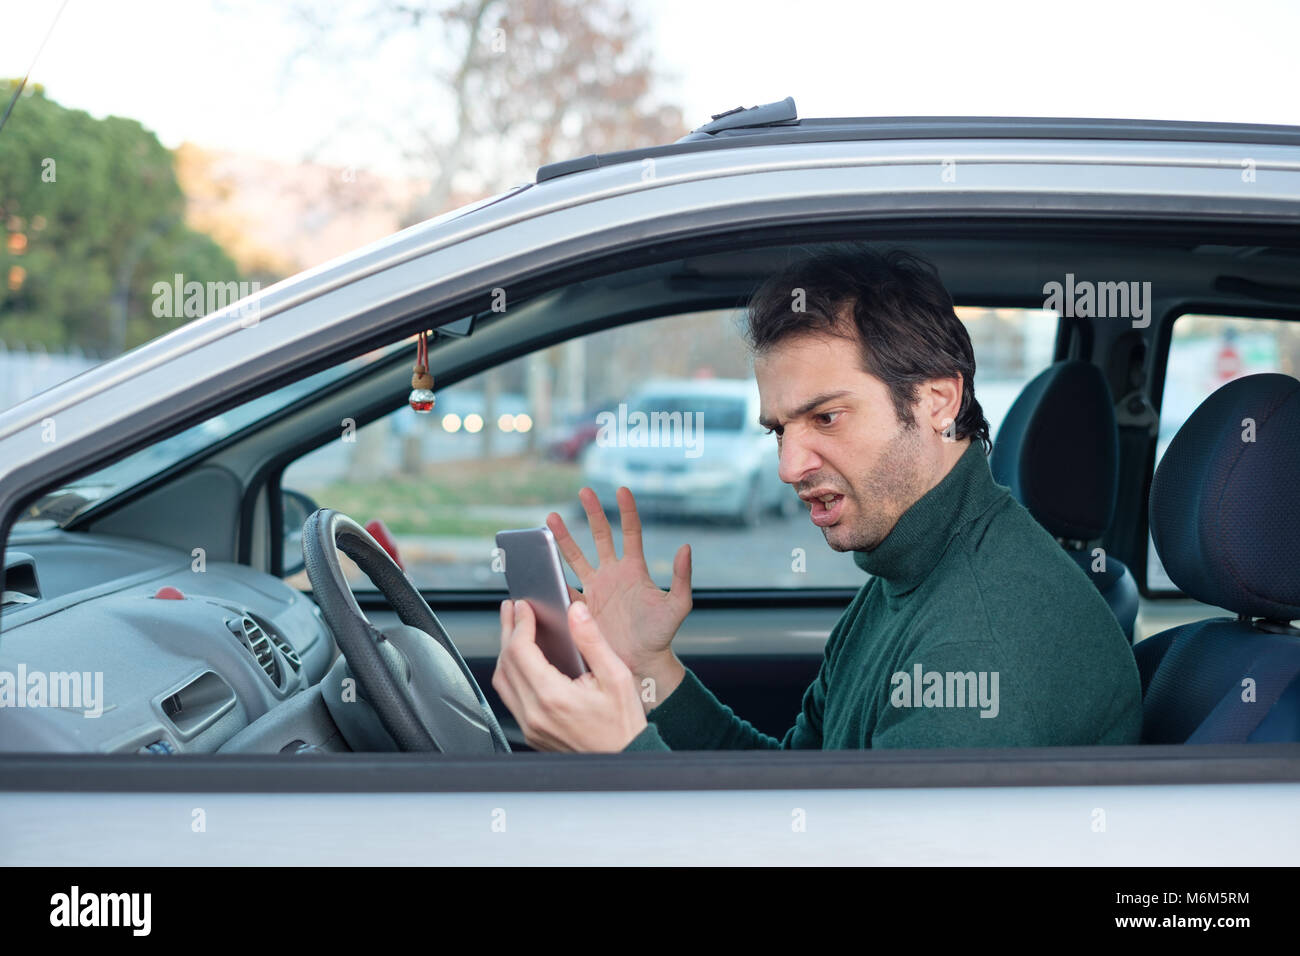 Rude man driving his car and distracted by mobile phone Stock Photo